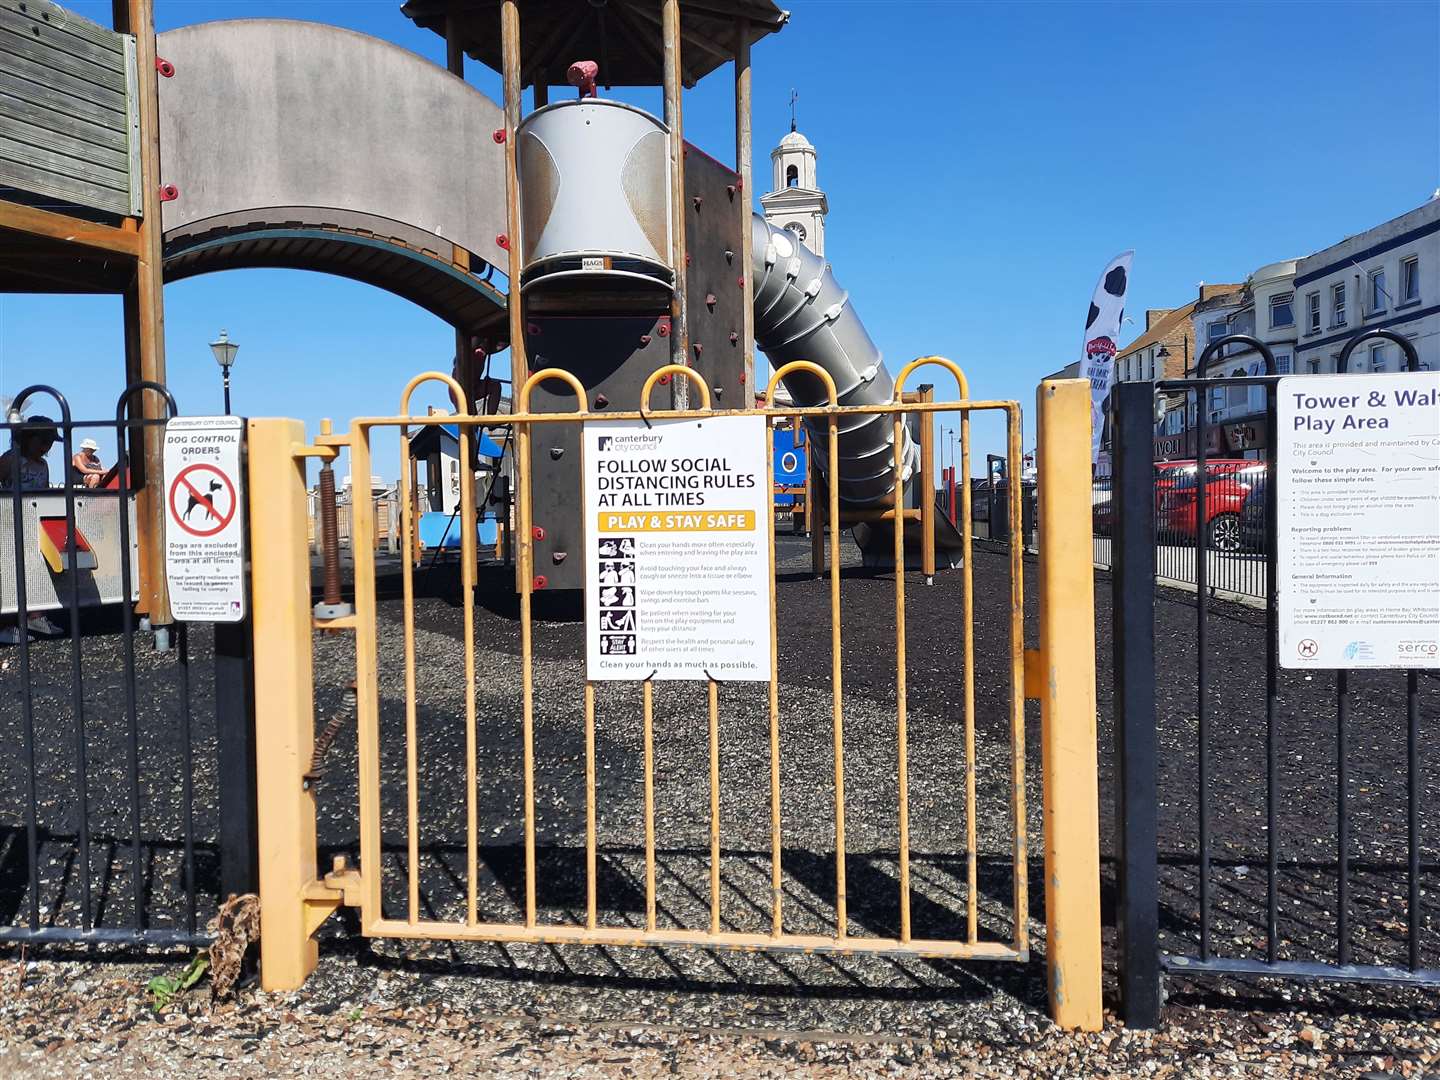 One of the entrances to the playground in Central Parade, Herne Bay